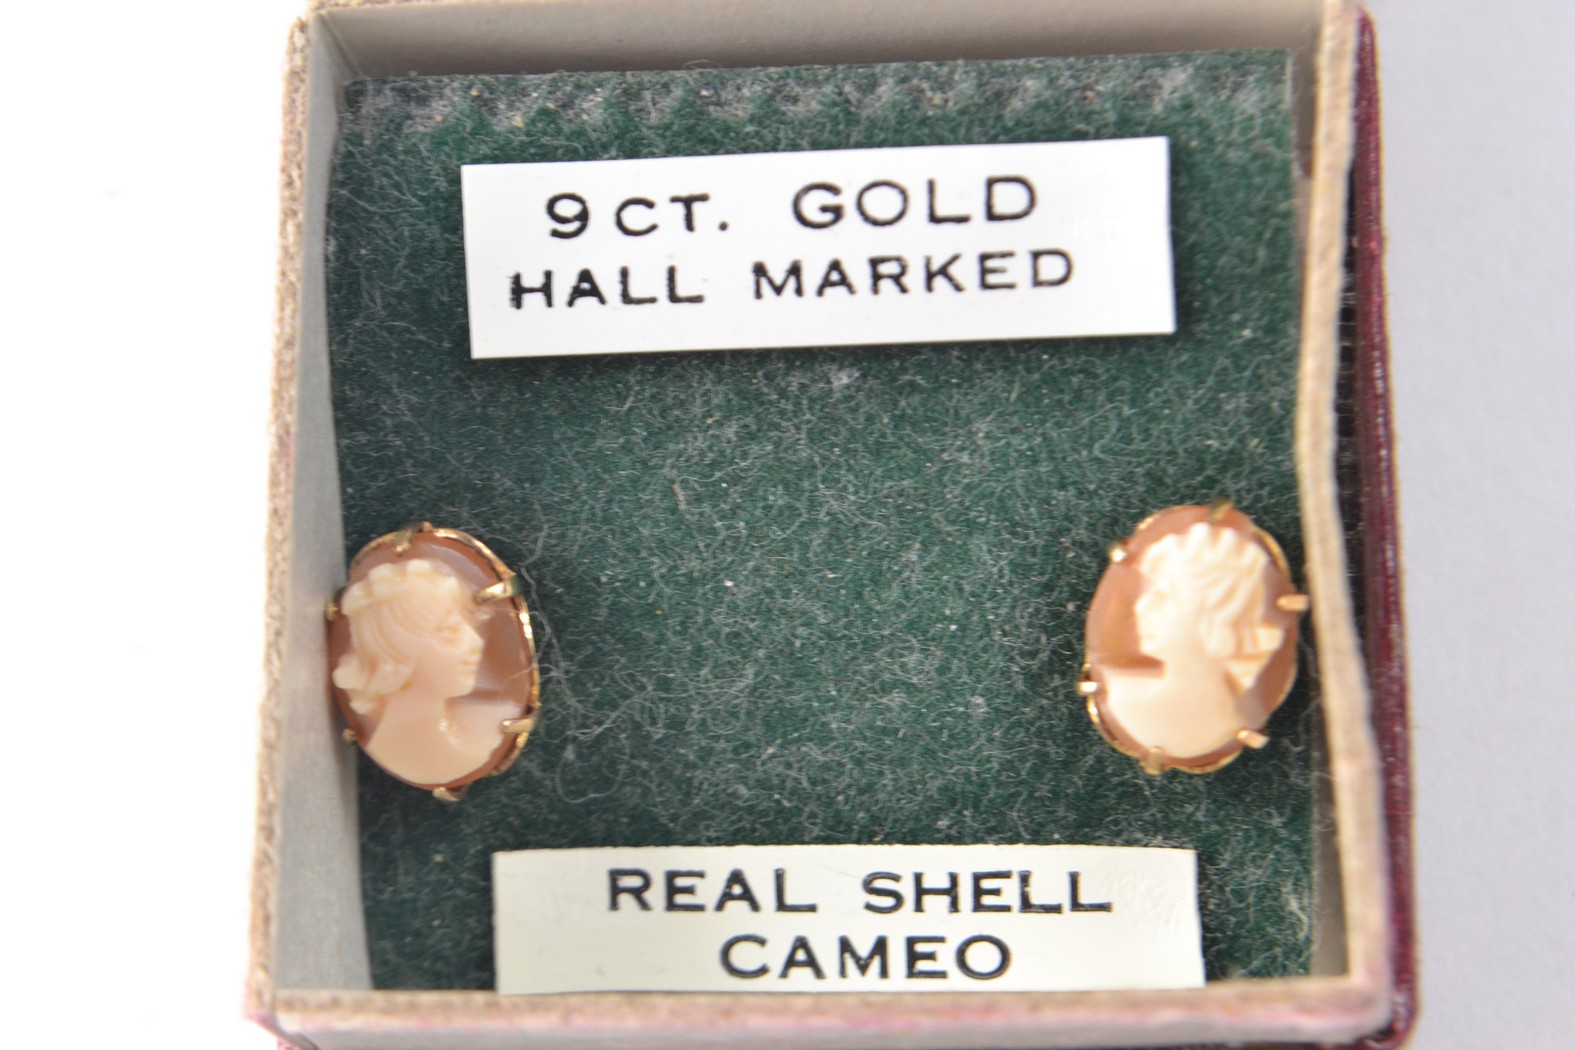 9ct gold stud earings with a real shell cameo design - Image 8 of 9